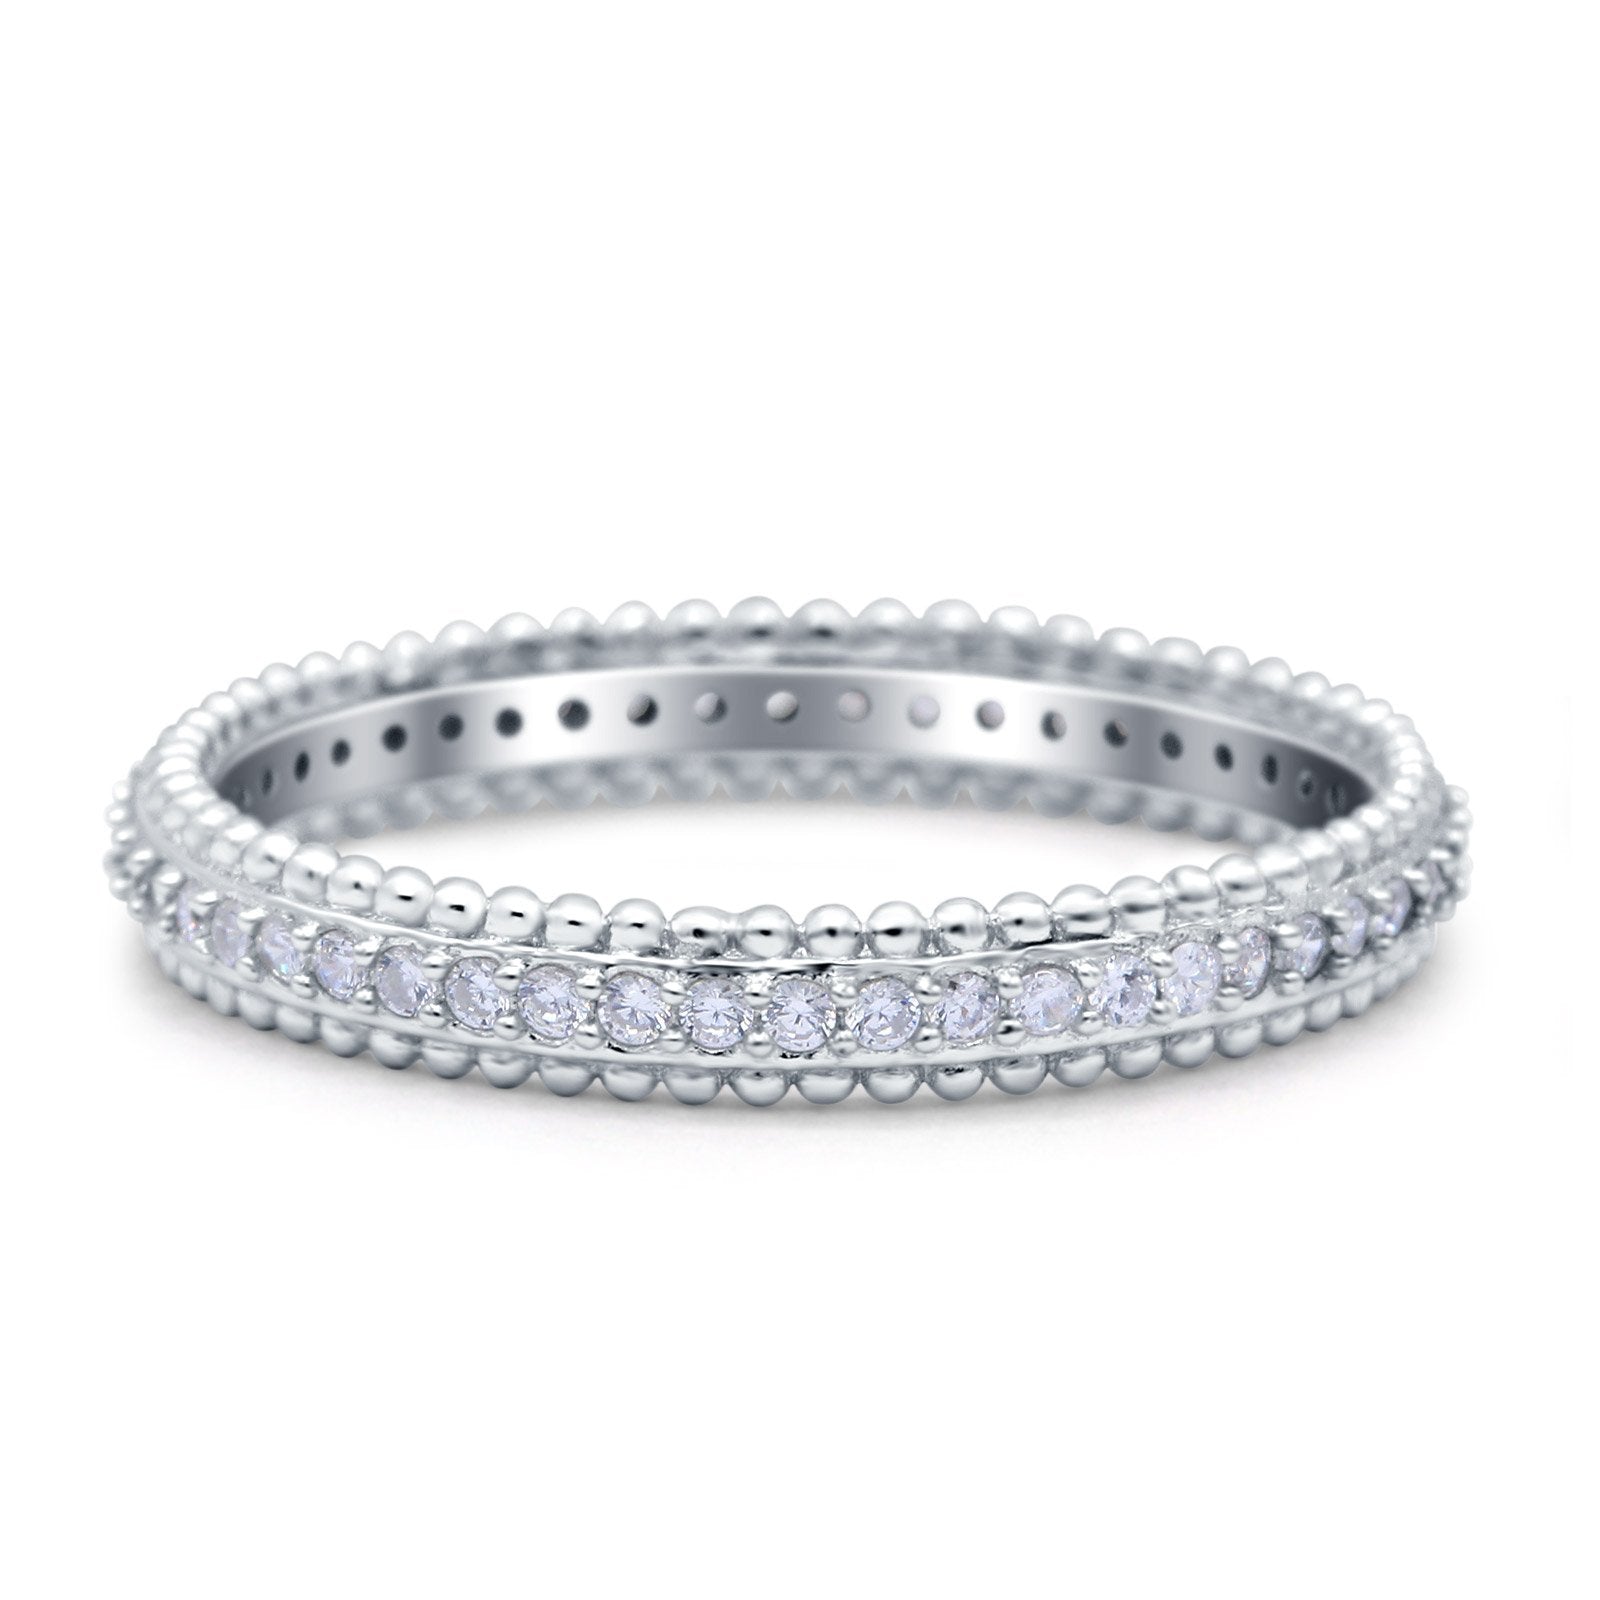 Full Eternity Band Wedding Ring Round Simulated Cubic Zirconia 925 Sterling Silver (3mm)